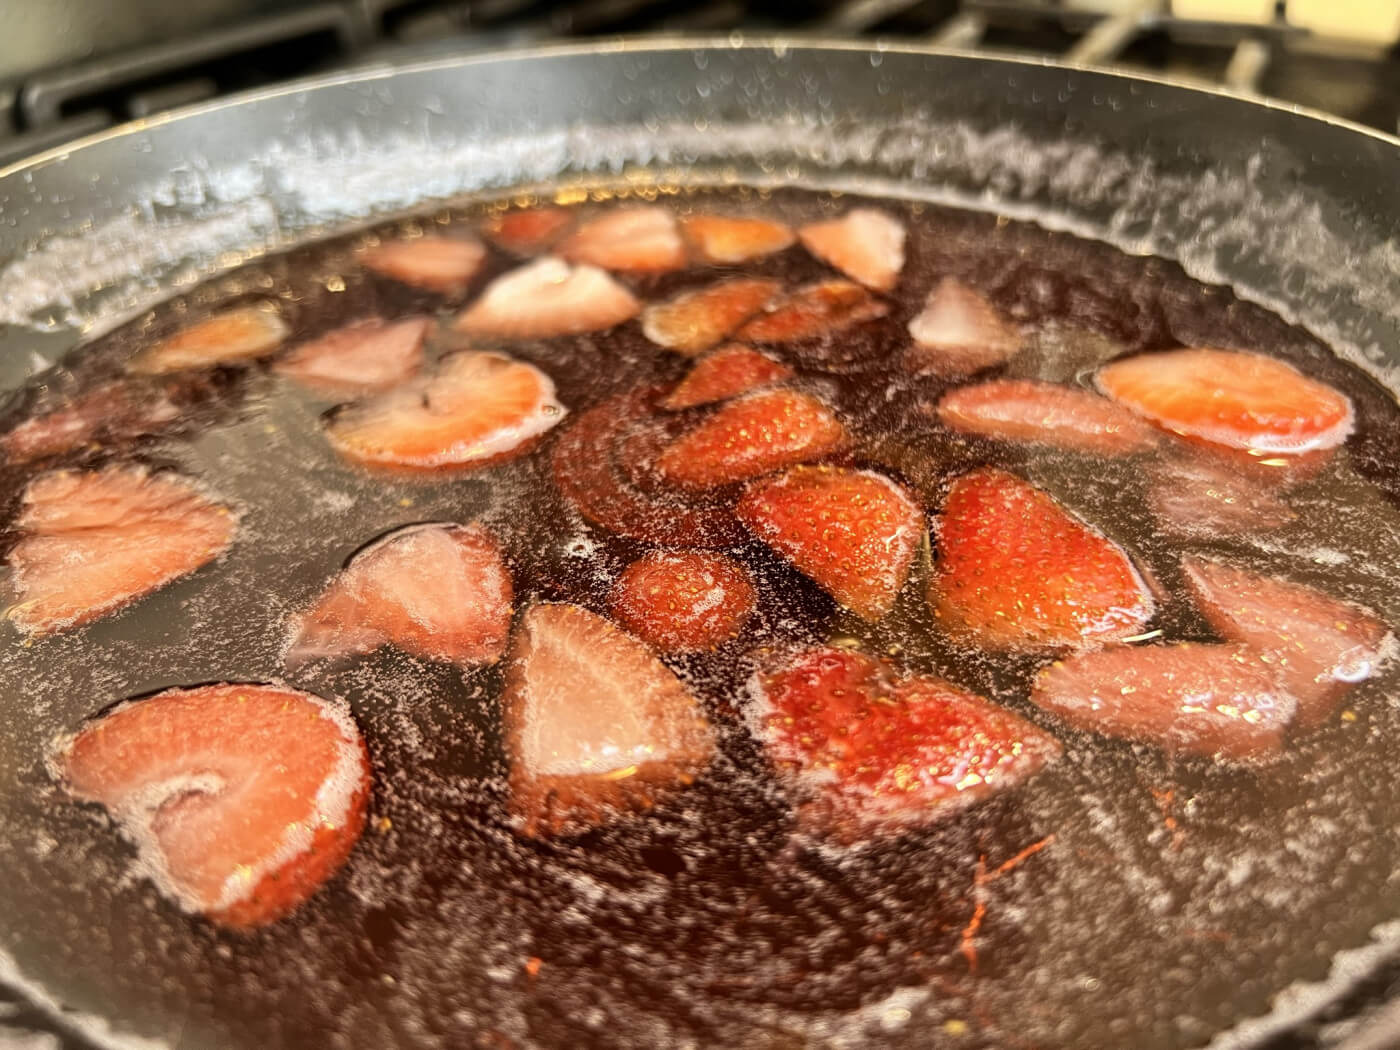 Homemade Strawberry Simple Syrup